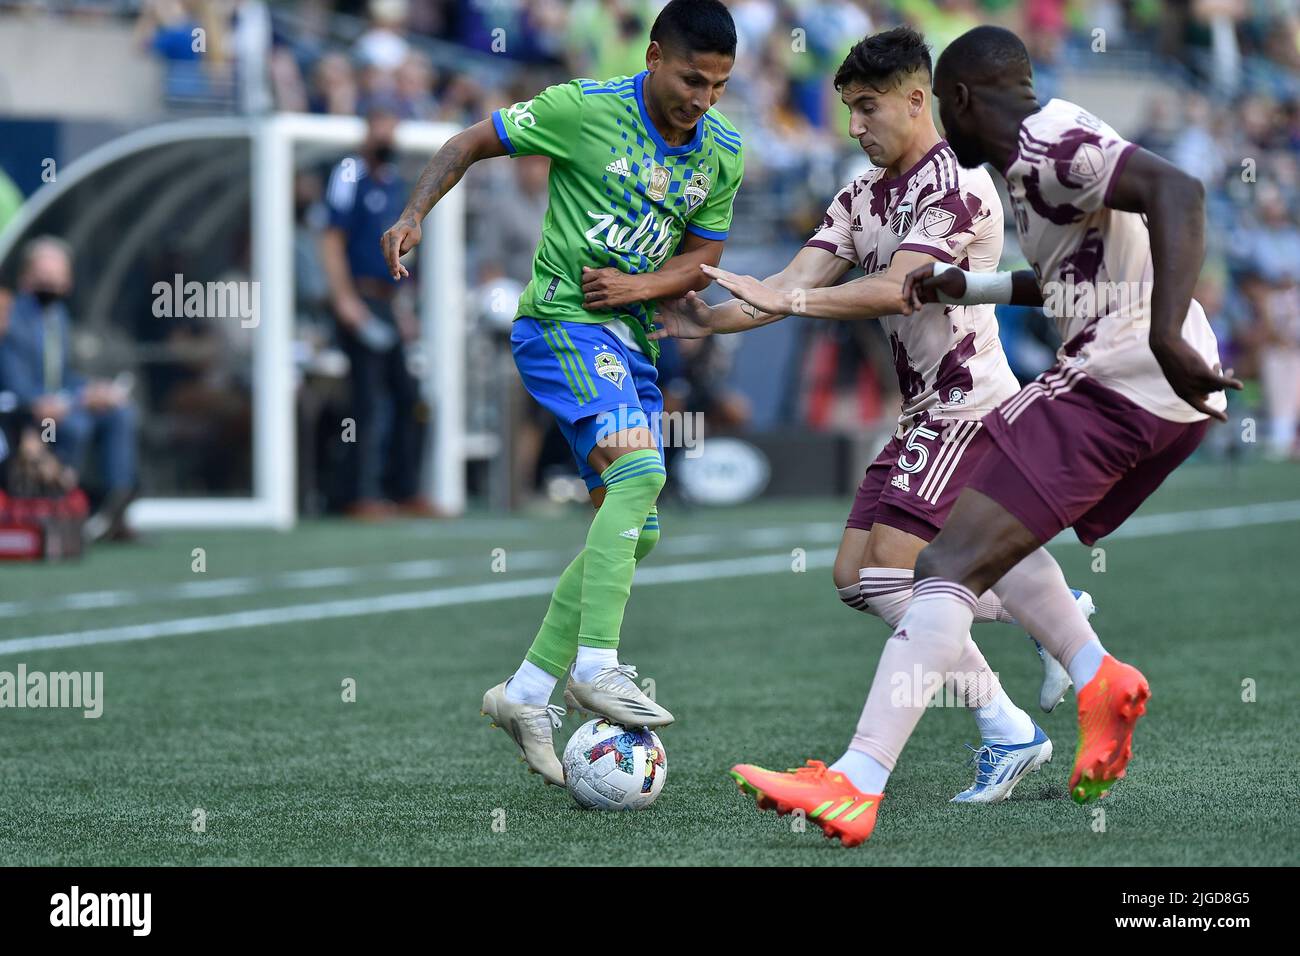 Seattle, WA, USA. 09th July, 2022. Seattle Sounders forward Paul Ruidiaz handles the ball during the MLS soccer match between the Portland Timbers and Seattle Sounders FC at Lumen Field in Seattle, WA. Portland defeated Seattle 3-0. Steve Faber/CSM/Alamy Live News Stock Photo